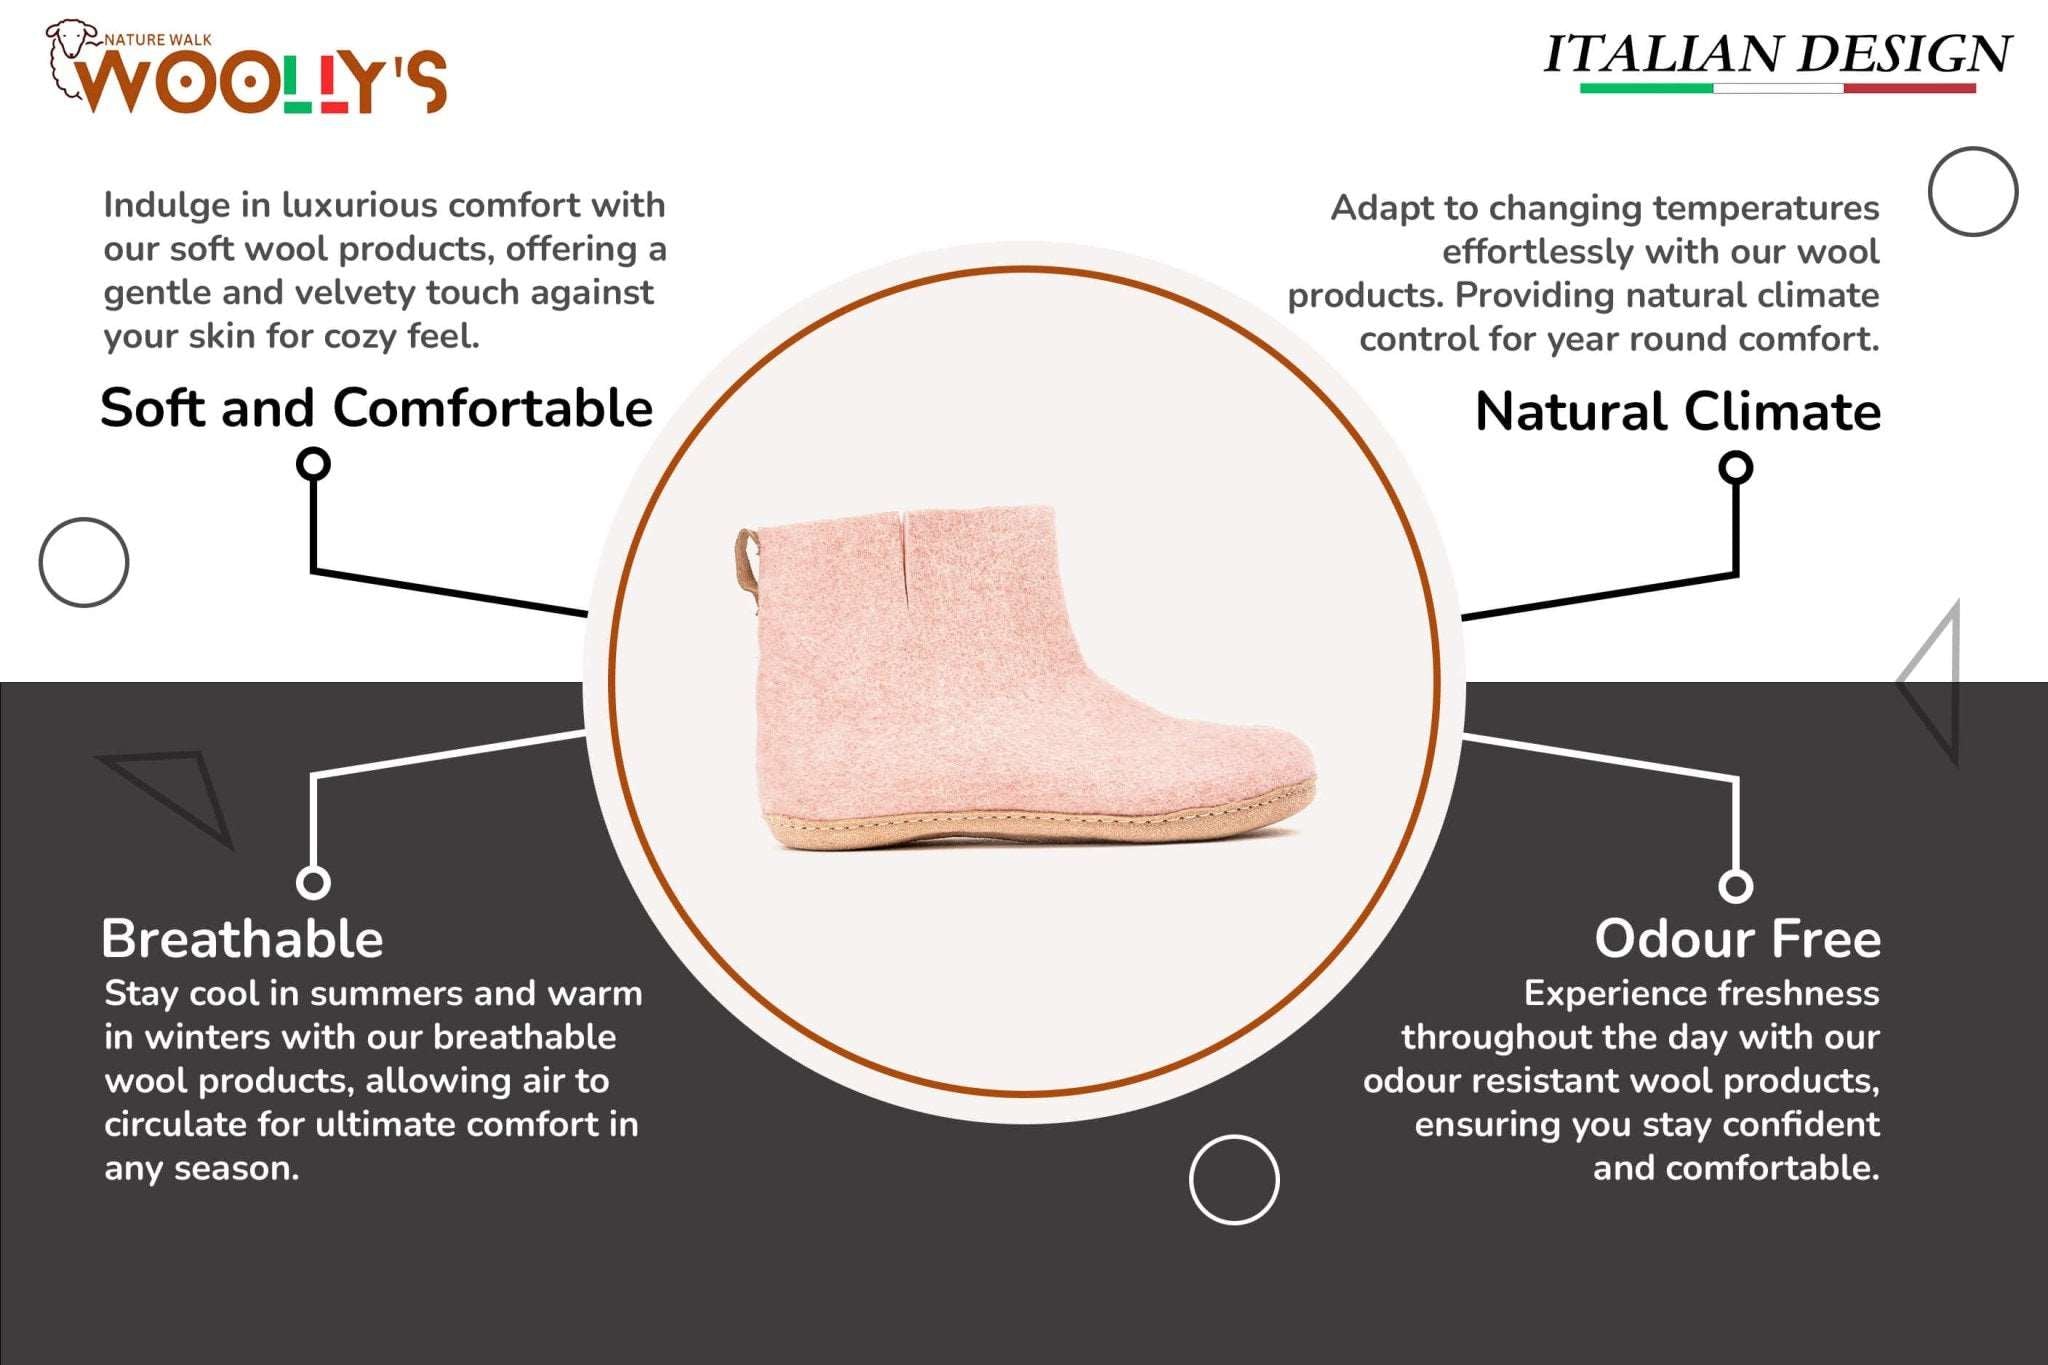 Indoor Boots With Leather Sole - Baby Pink - Woollyes